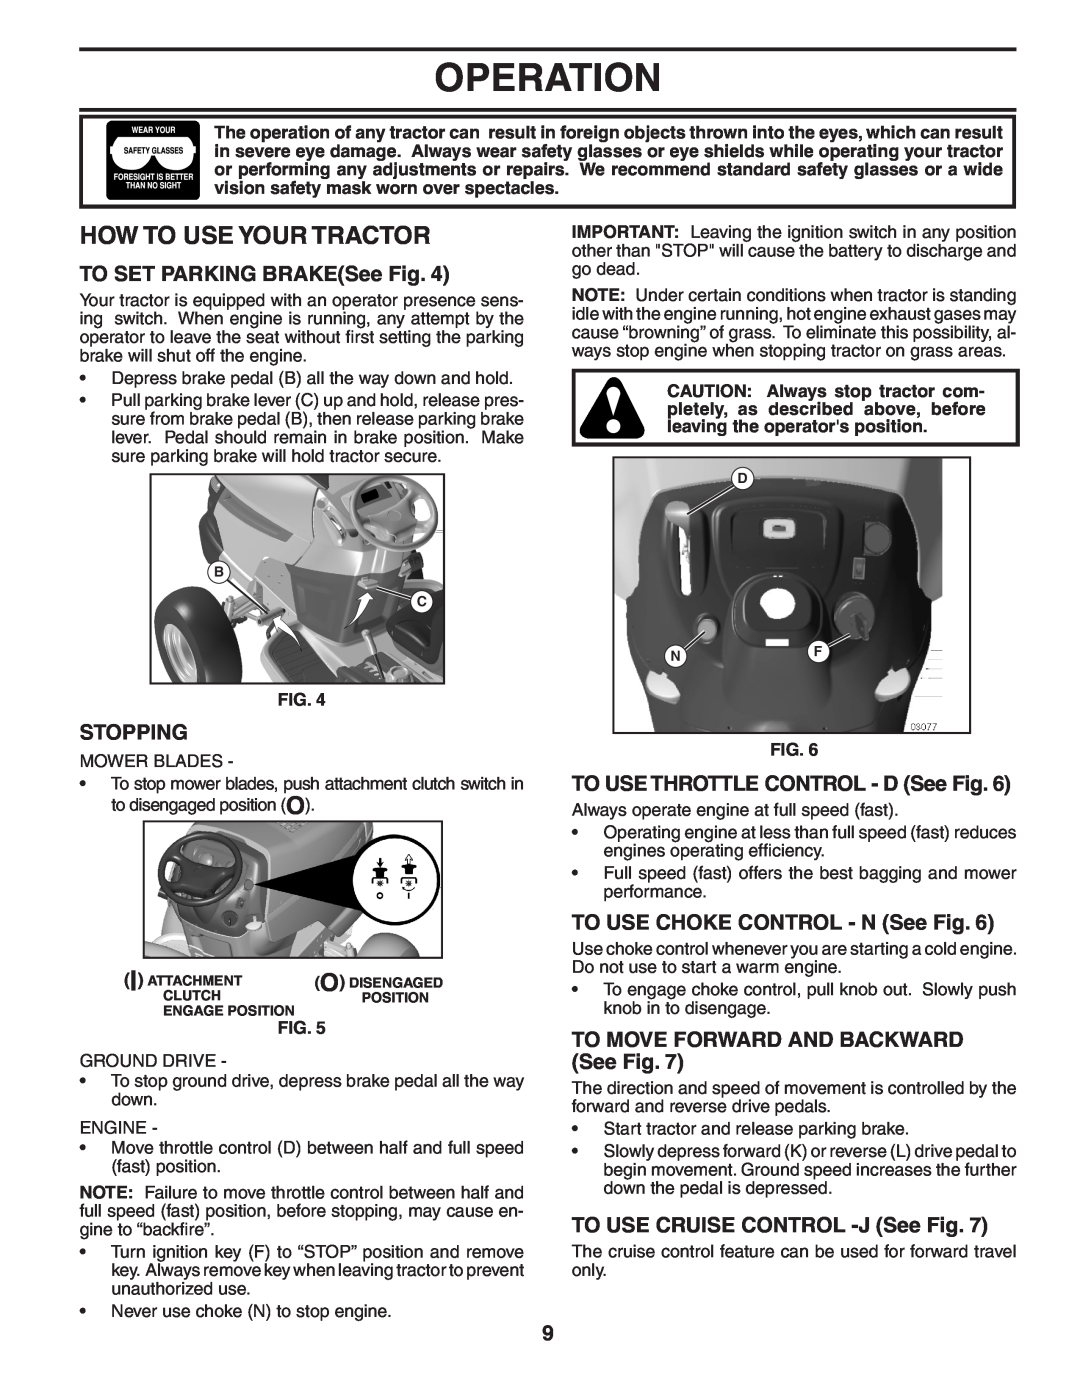 Poulan 960420022 manual How To Use Your Tractor, TO SET PARKING BRAKESee Fig, Stopping, TO USE THROTTLE CONTROL - D See Fig 